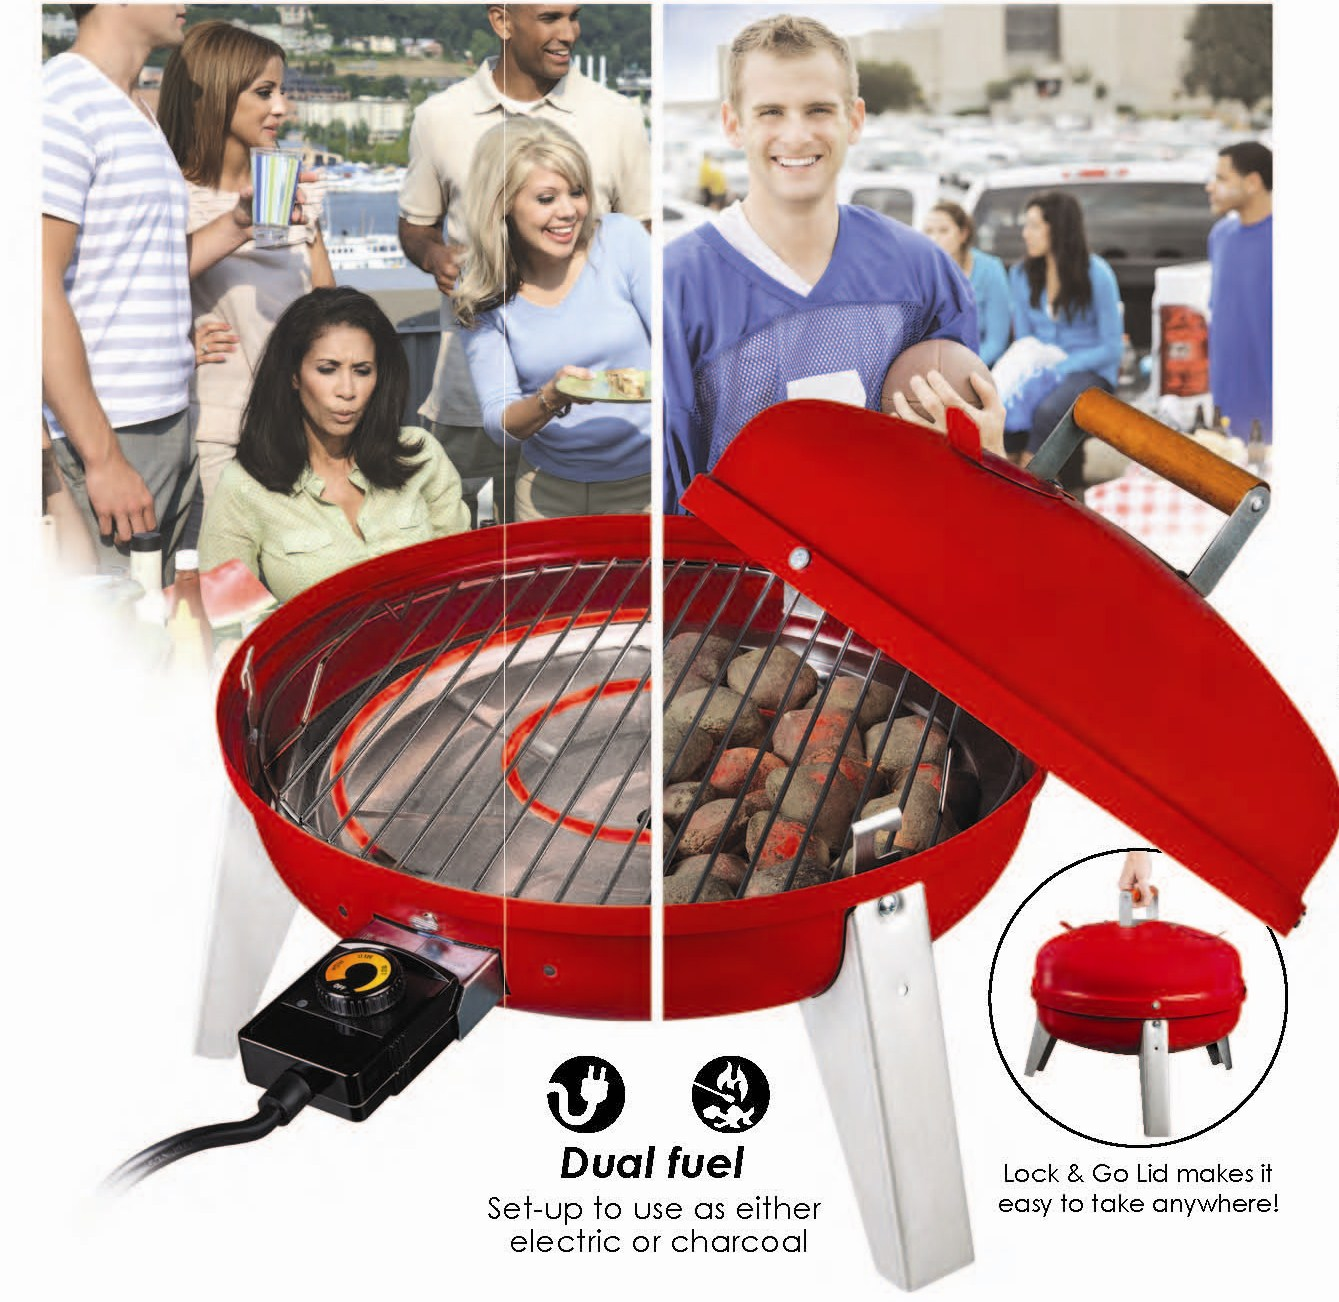 Wherever Grill: The Only Dual-Fuel Electric/Charcoal BBQ Grill -  Kitchenware News & Housewares ReviewKitchenware News & Housewares Review